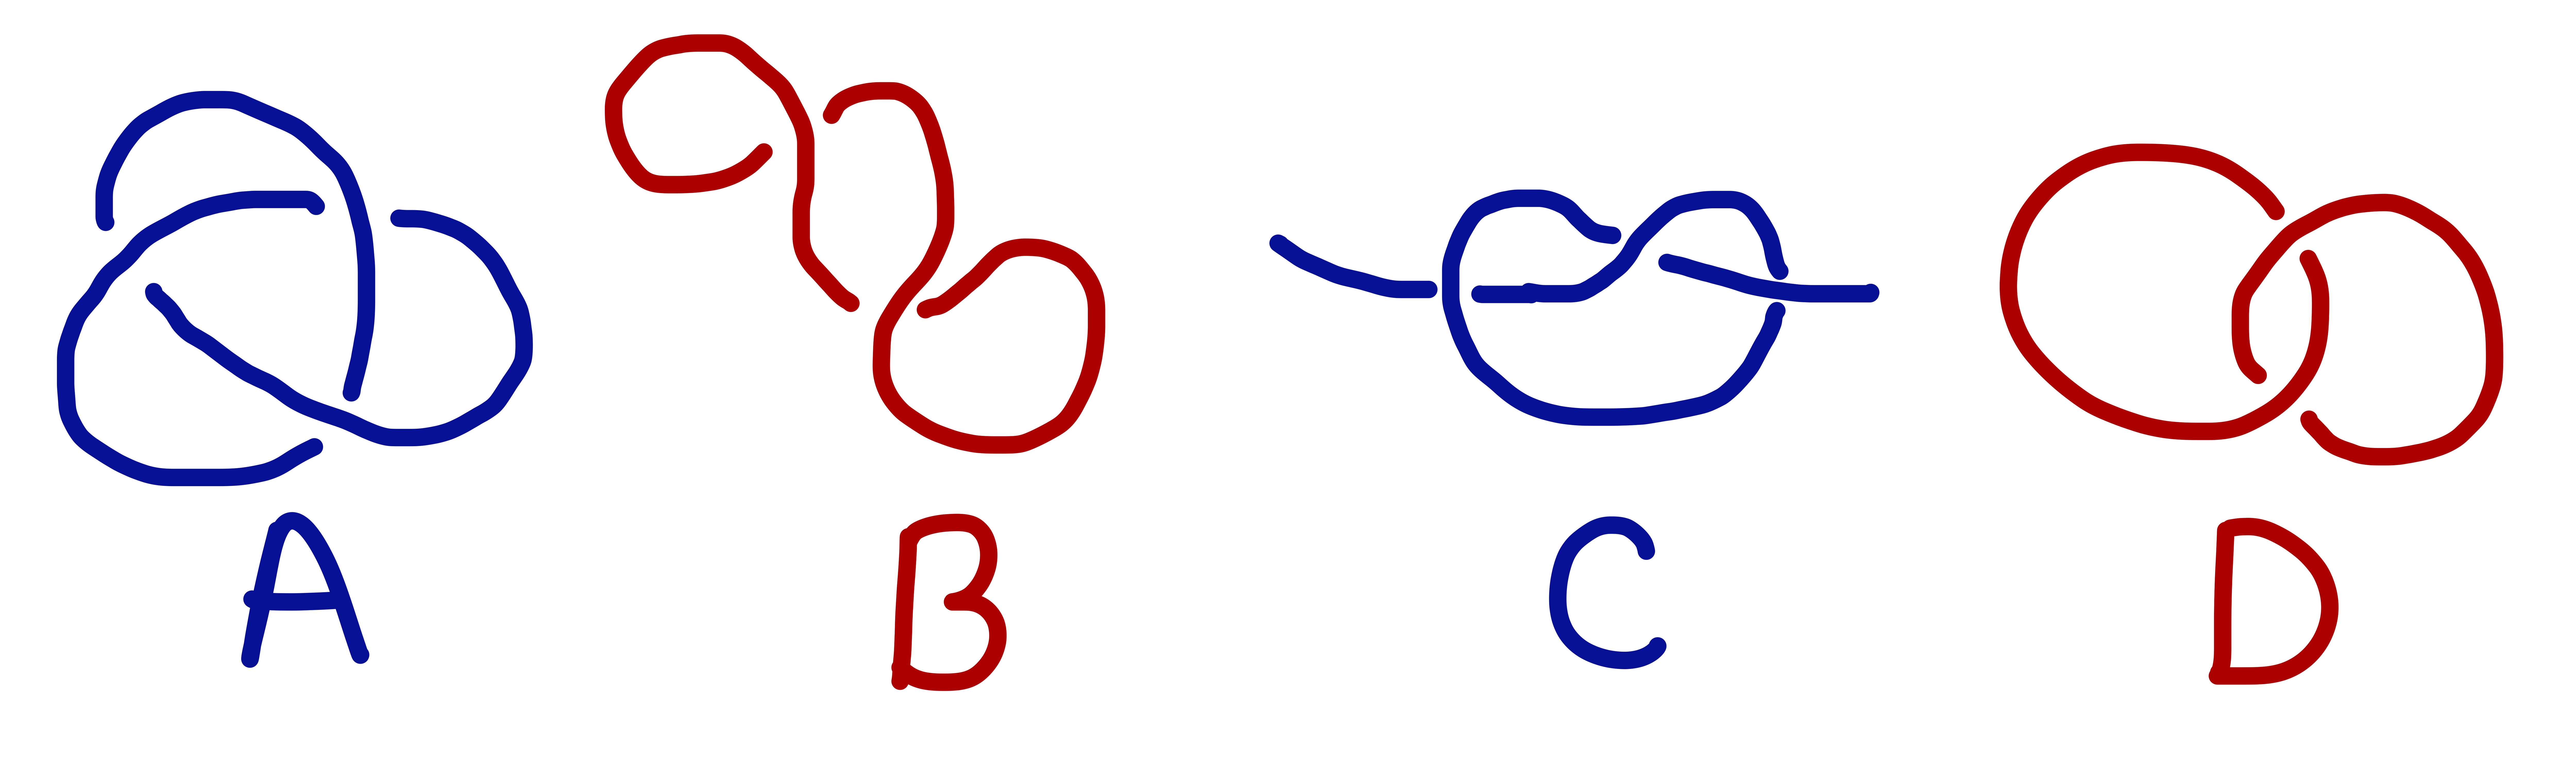 diagram A is a one-string trefoil, diagram b is a single loop with two twists, diagram c is an overhand knot with two loose ends, diagram d is a two-strand hopf link